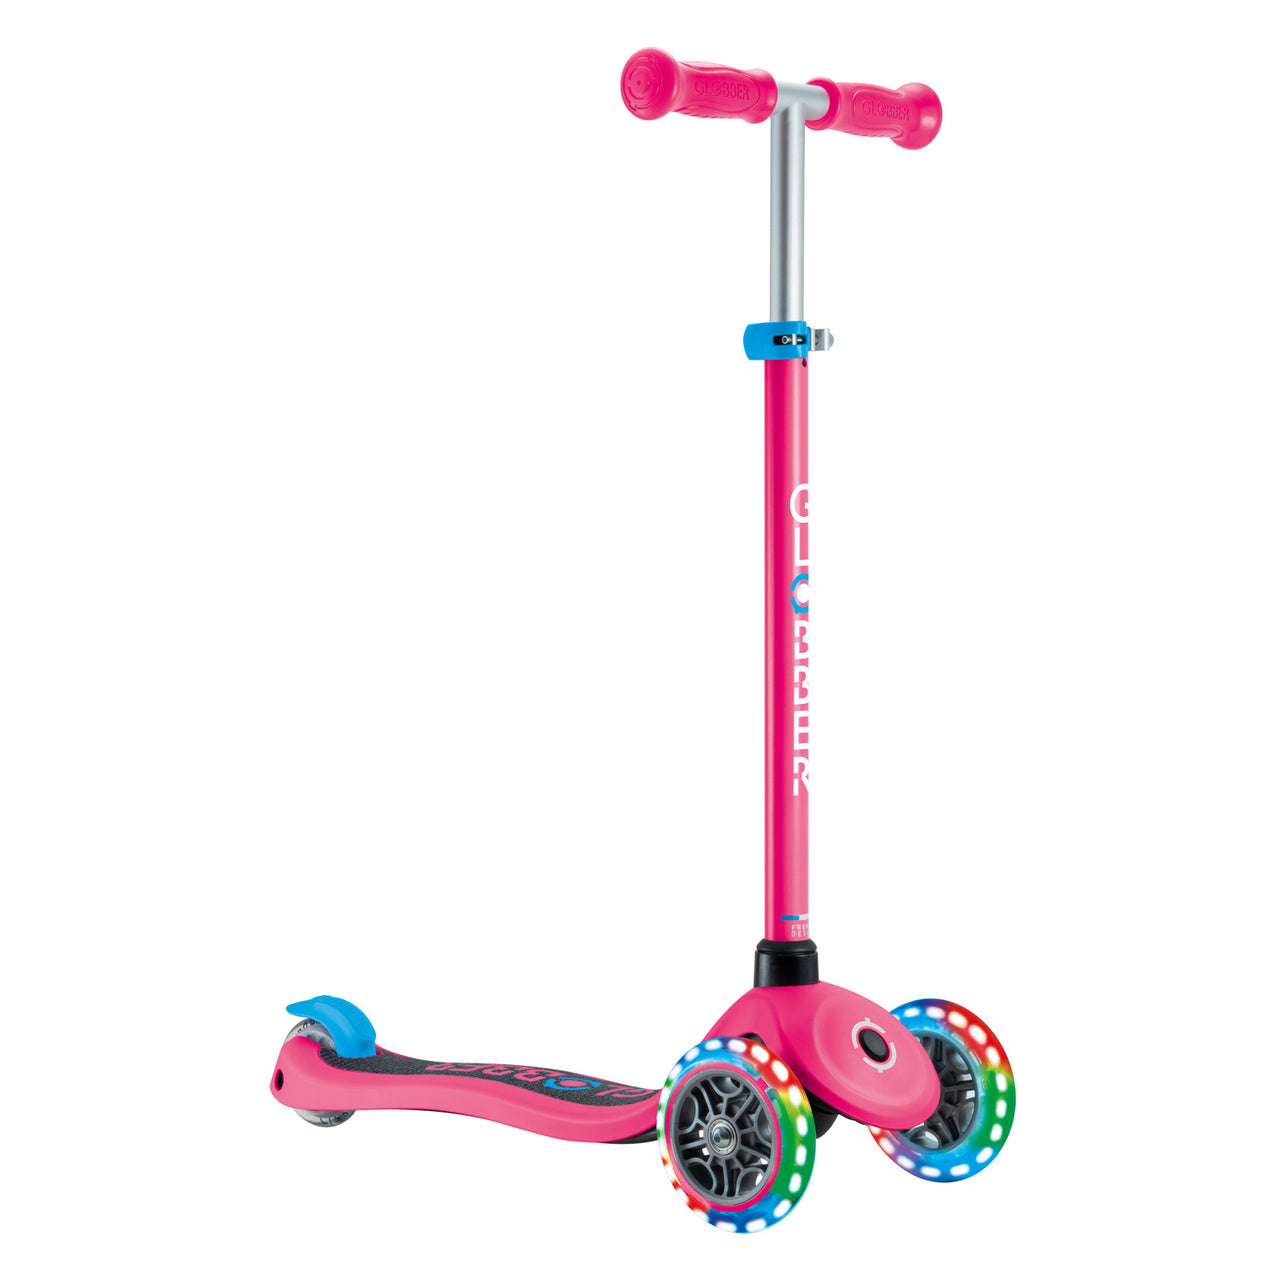 Globber V2 Lights And Grip Tape 3 Wheel Scooter Pink And Blue